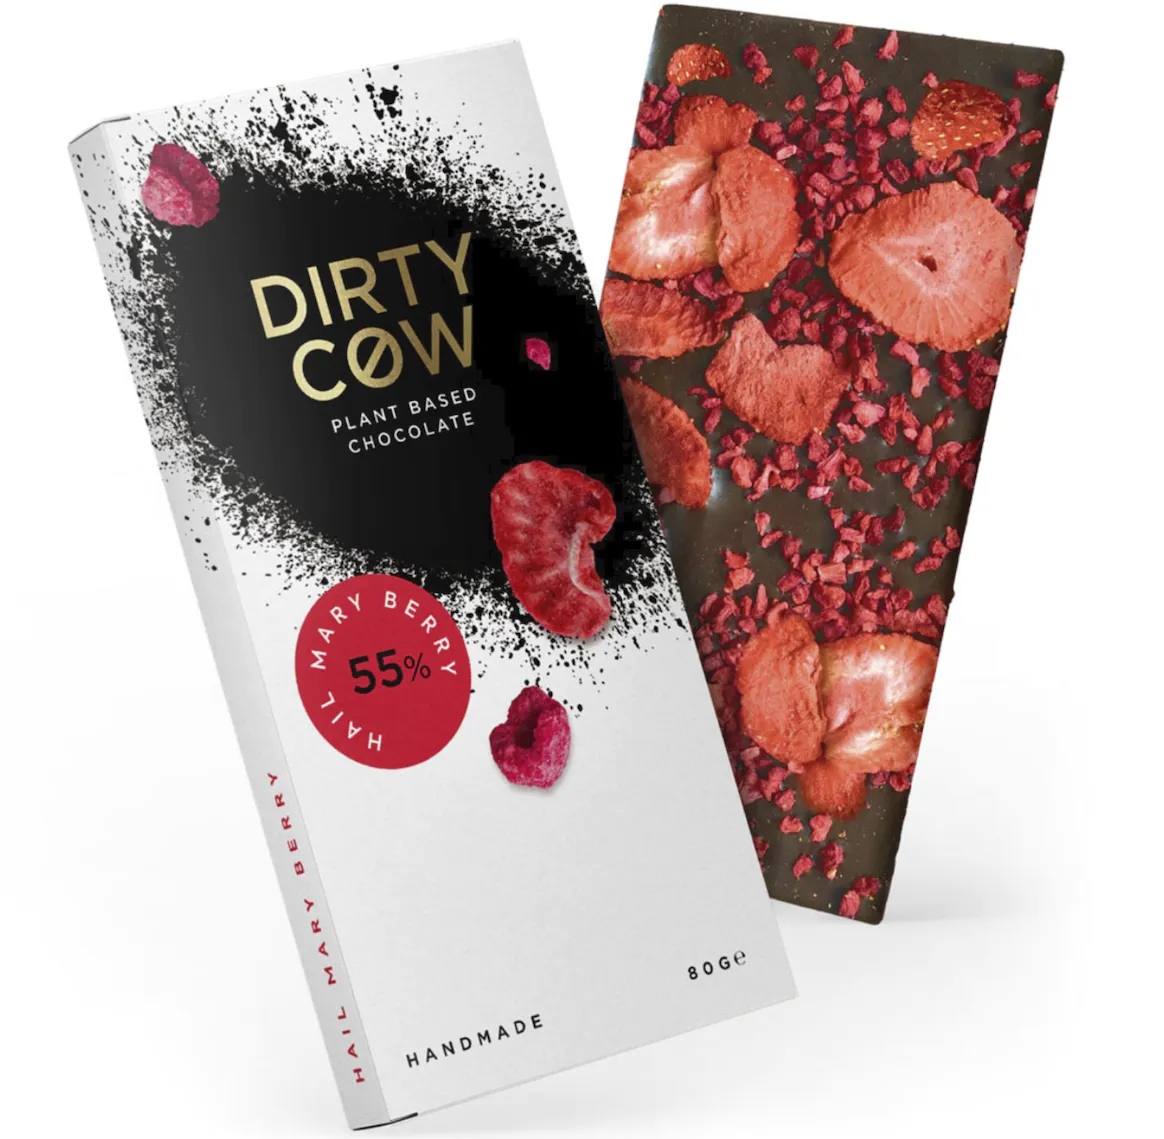 What better treat to enjoy during the month of love than the Dirty Cow Hail Mary Berry Strawberry Chocolate?

#veganchocolate #darkchocolate #strawberries #dairyfreechocolate #healthymum #mothersdaygifts #mothersday23 #giftsformums #ukfitfamily #snacksubscription #ukmums #ukmum